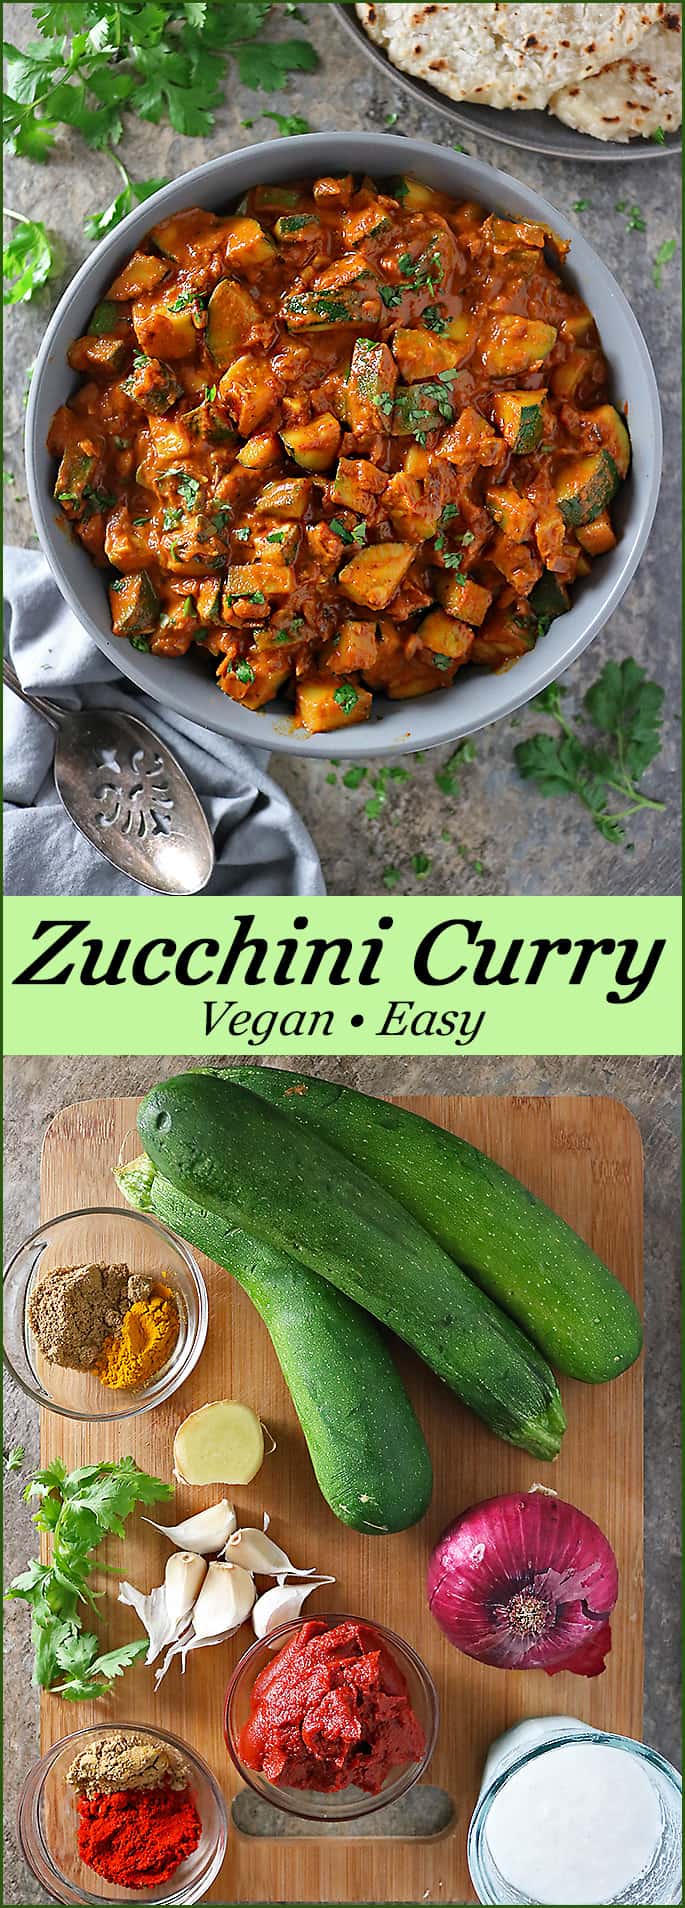 Easy Plant-based Zucchini Curry Recipe - Savory Spin